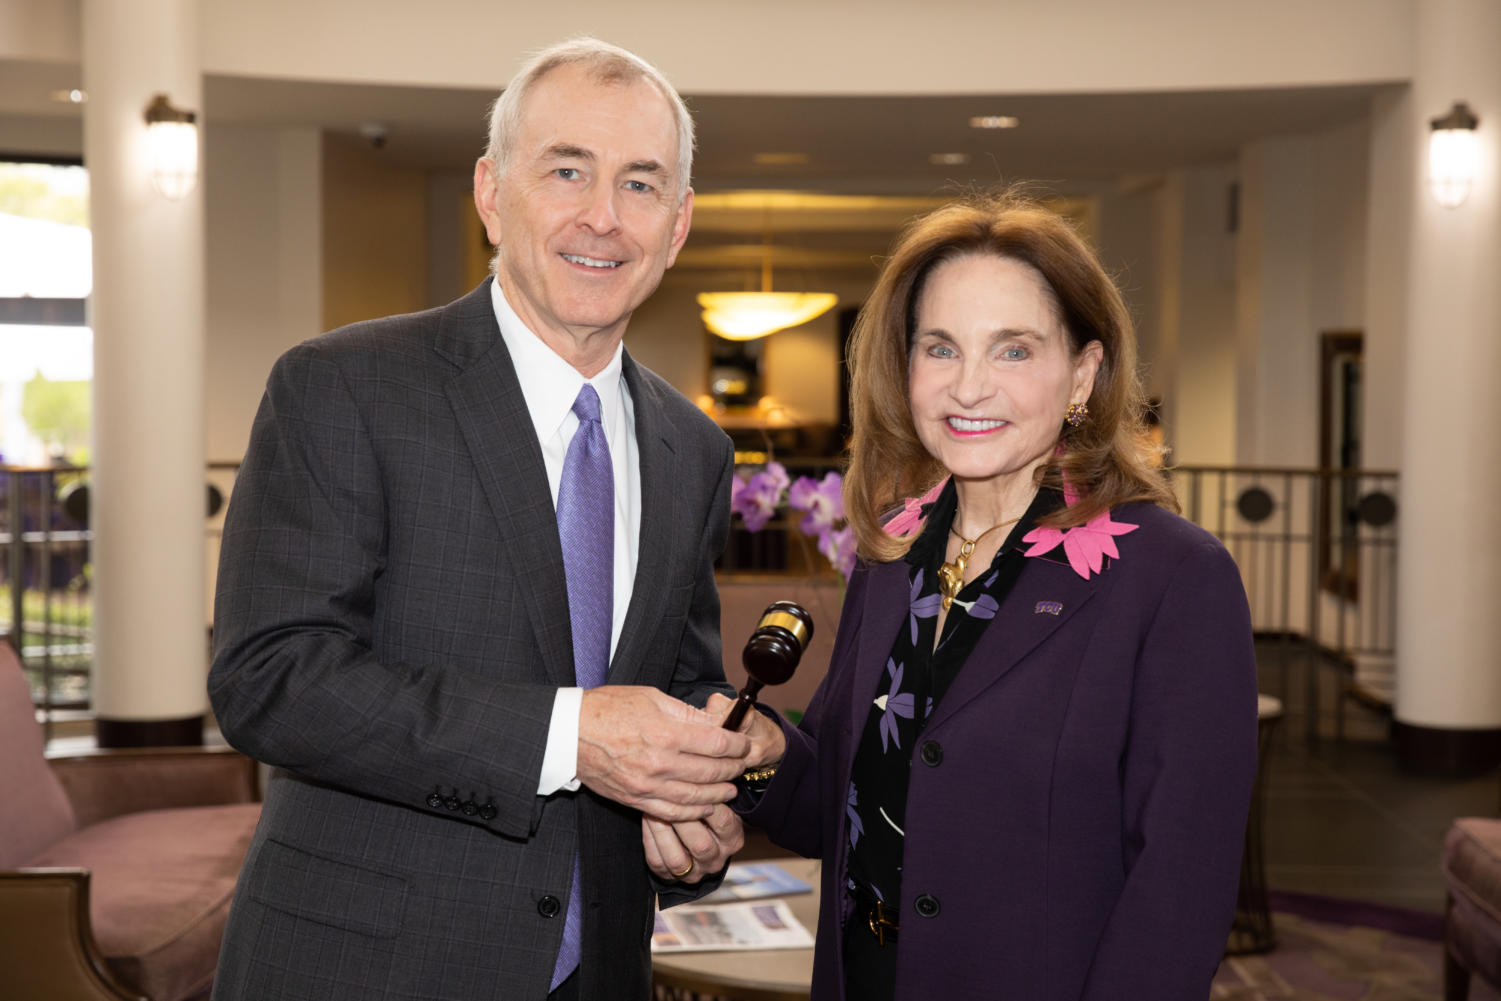 The previous chair, Mark Johnson, passes his gavel to Kit Moncrief. (Photo courtesy of TCU)